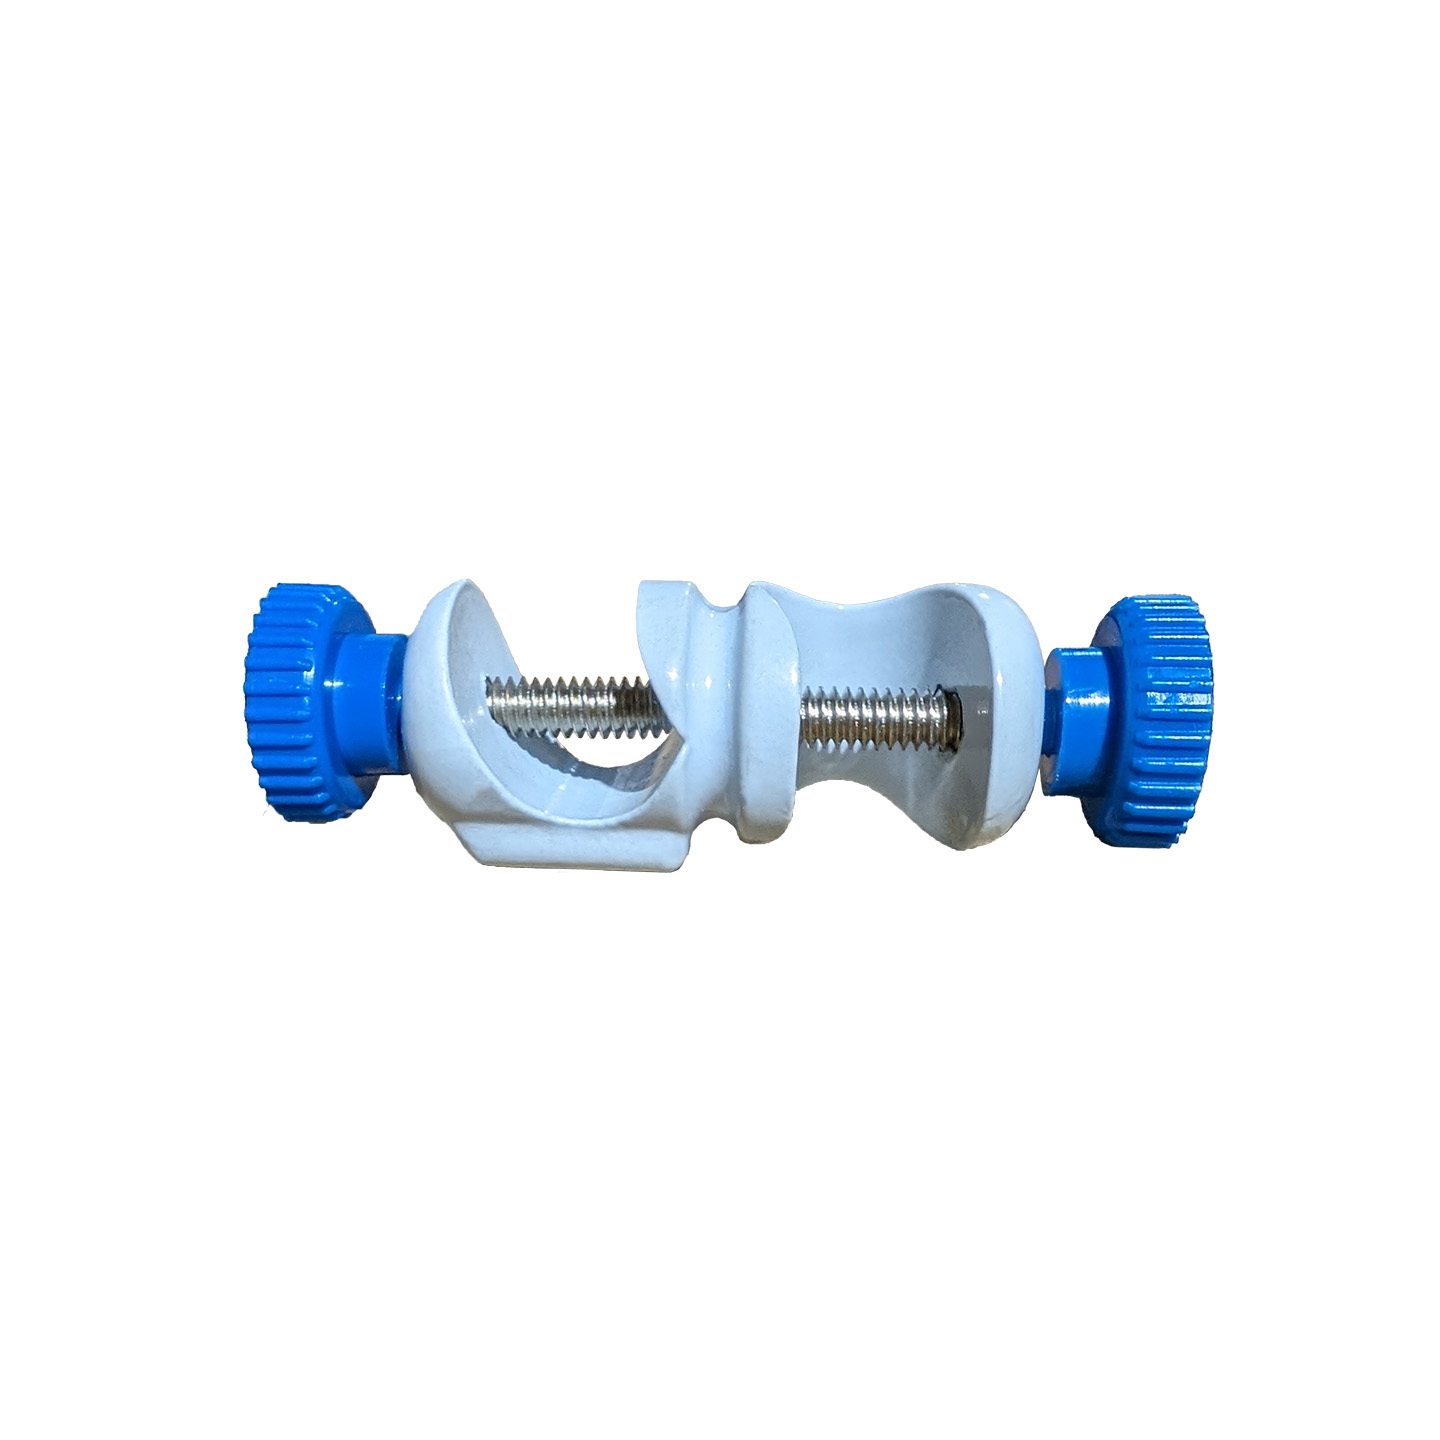 Bosshead, Die-cast Alloy, White Plastic Coated, With Round Blue Screw Head, Fits Rod Up To 16mm,